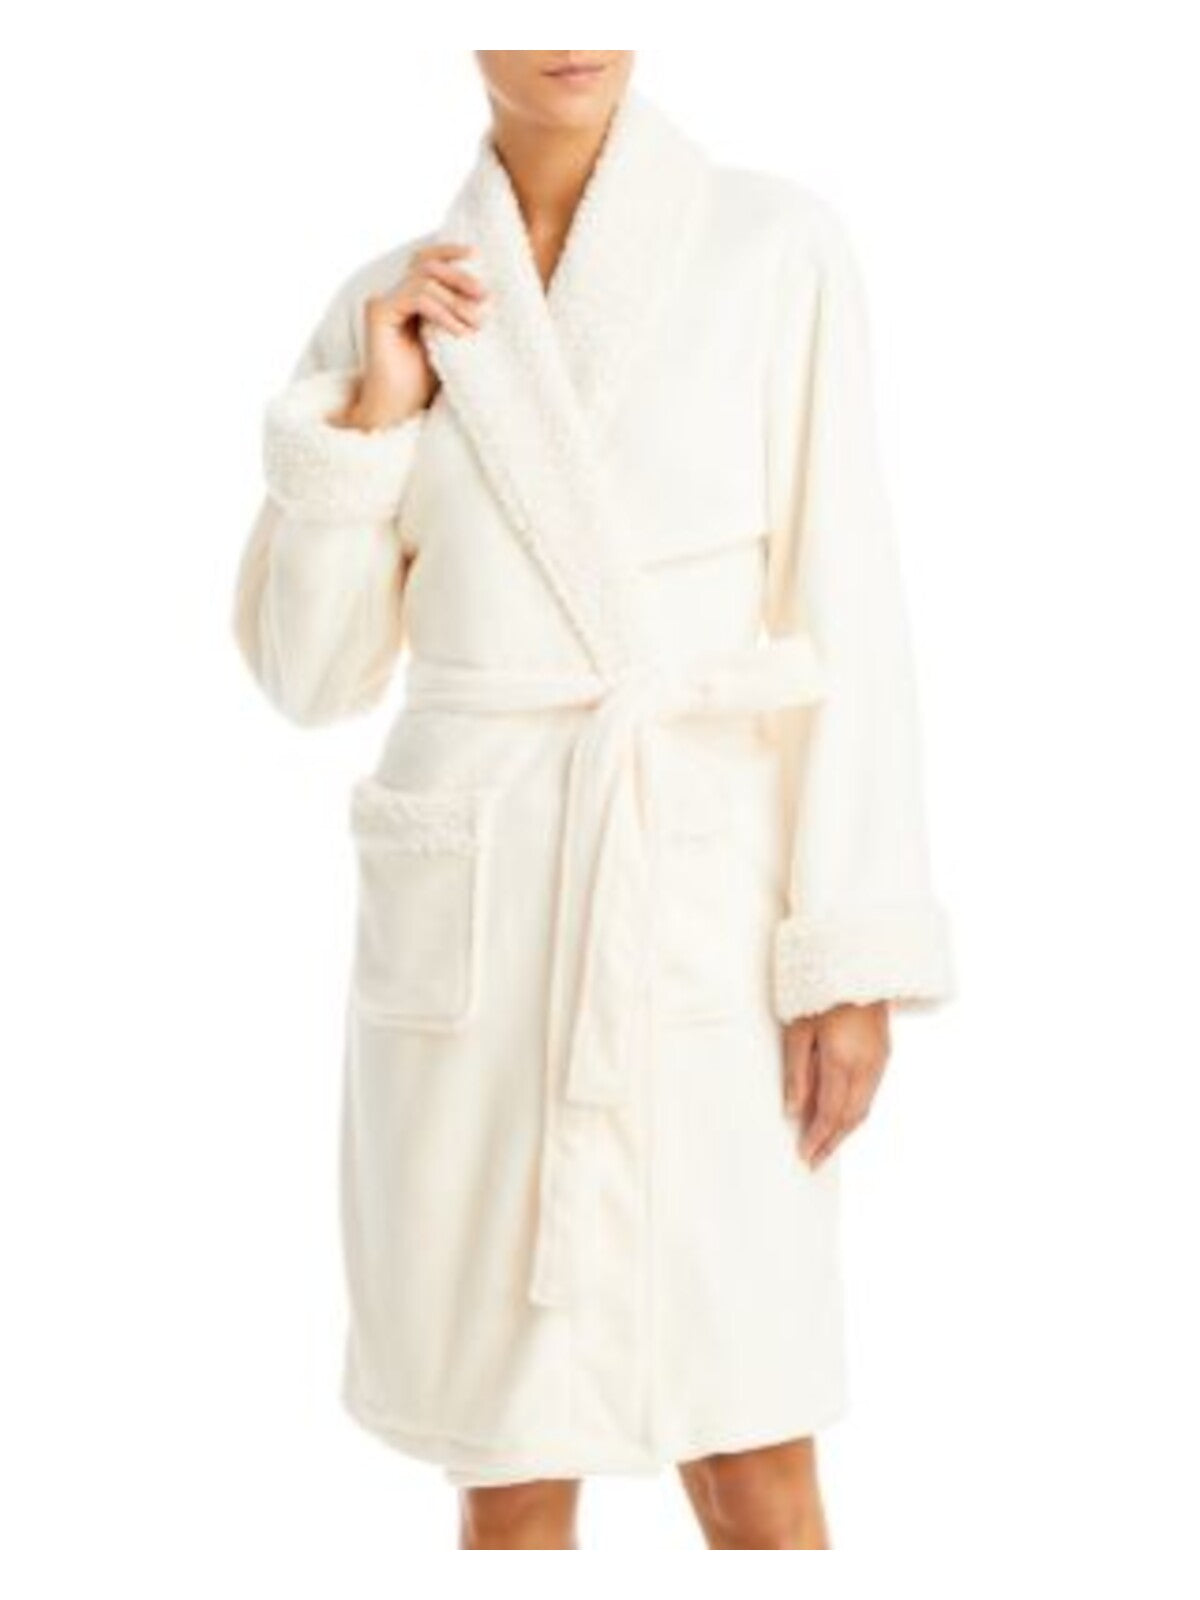 HUDSON PARK COLLECTION Intimates Beige Pocketed Robe S\M